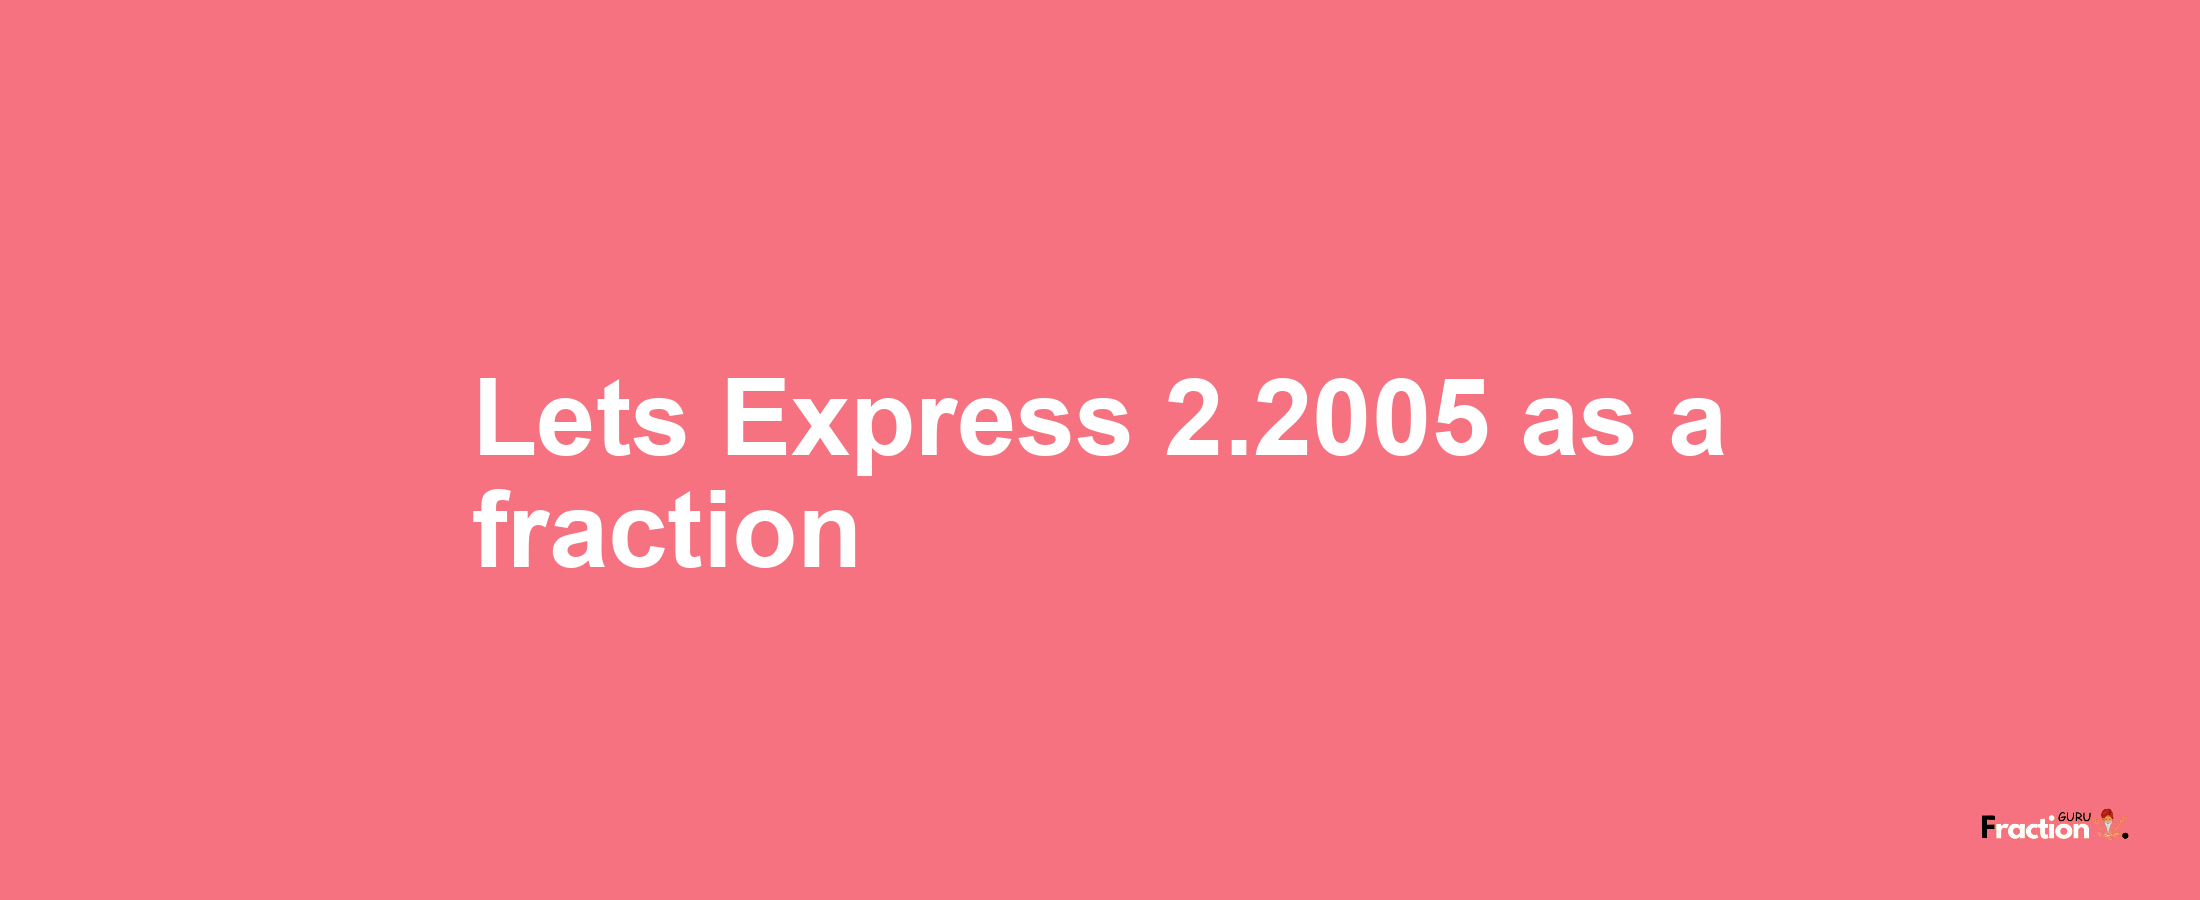 Lets Express 2.2005 as afraction